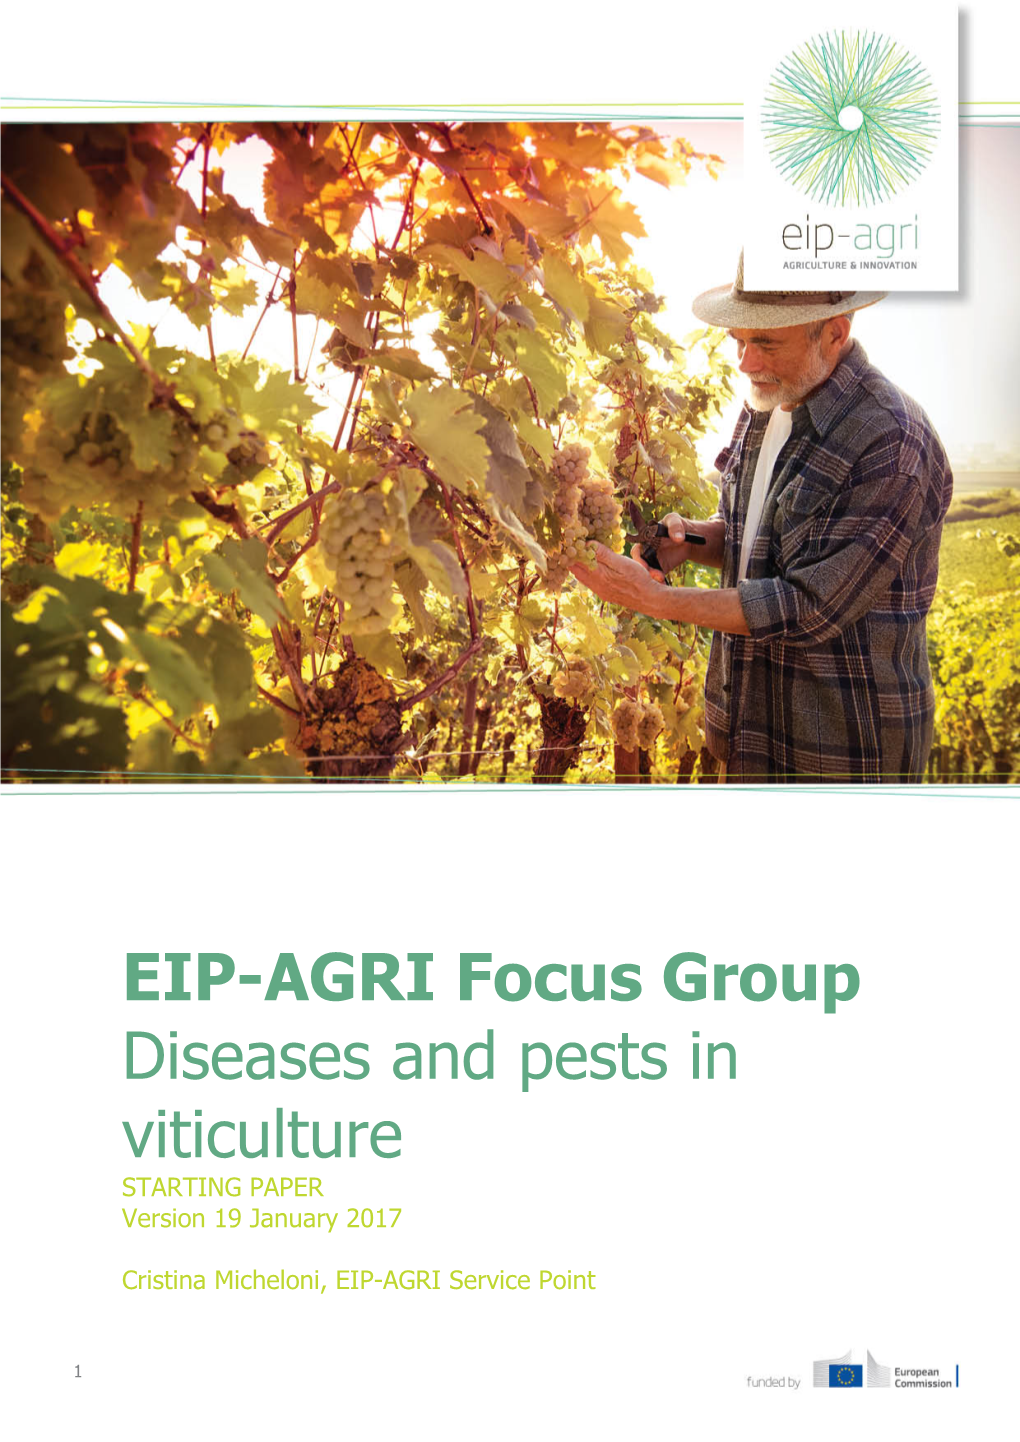 EIP-AGRI Focus Group Diseases and Pests in Viticulture STARTING PAPER Version 19 January 2017